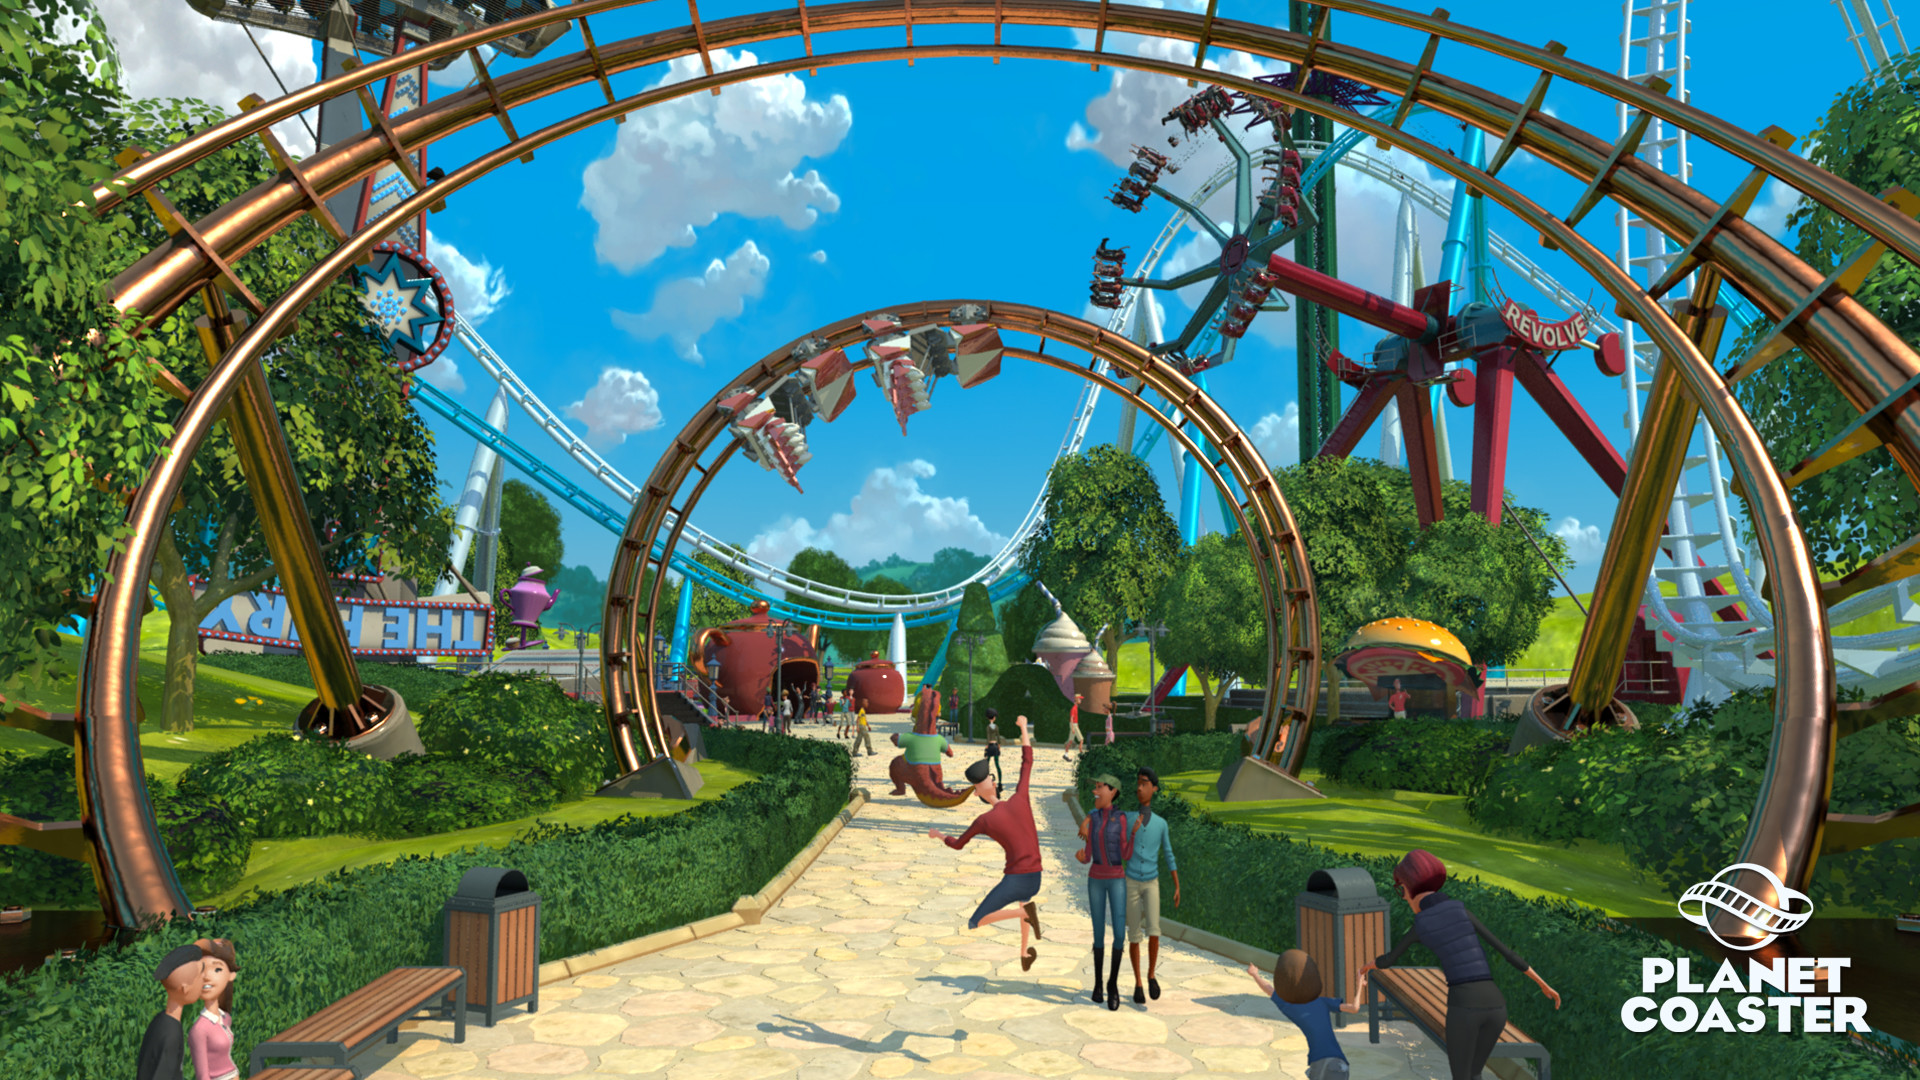 1920x1080 RollerCoaster Tycoon images RollerCoaster Tycoon 3 HD wallpaper